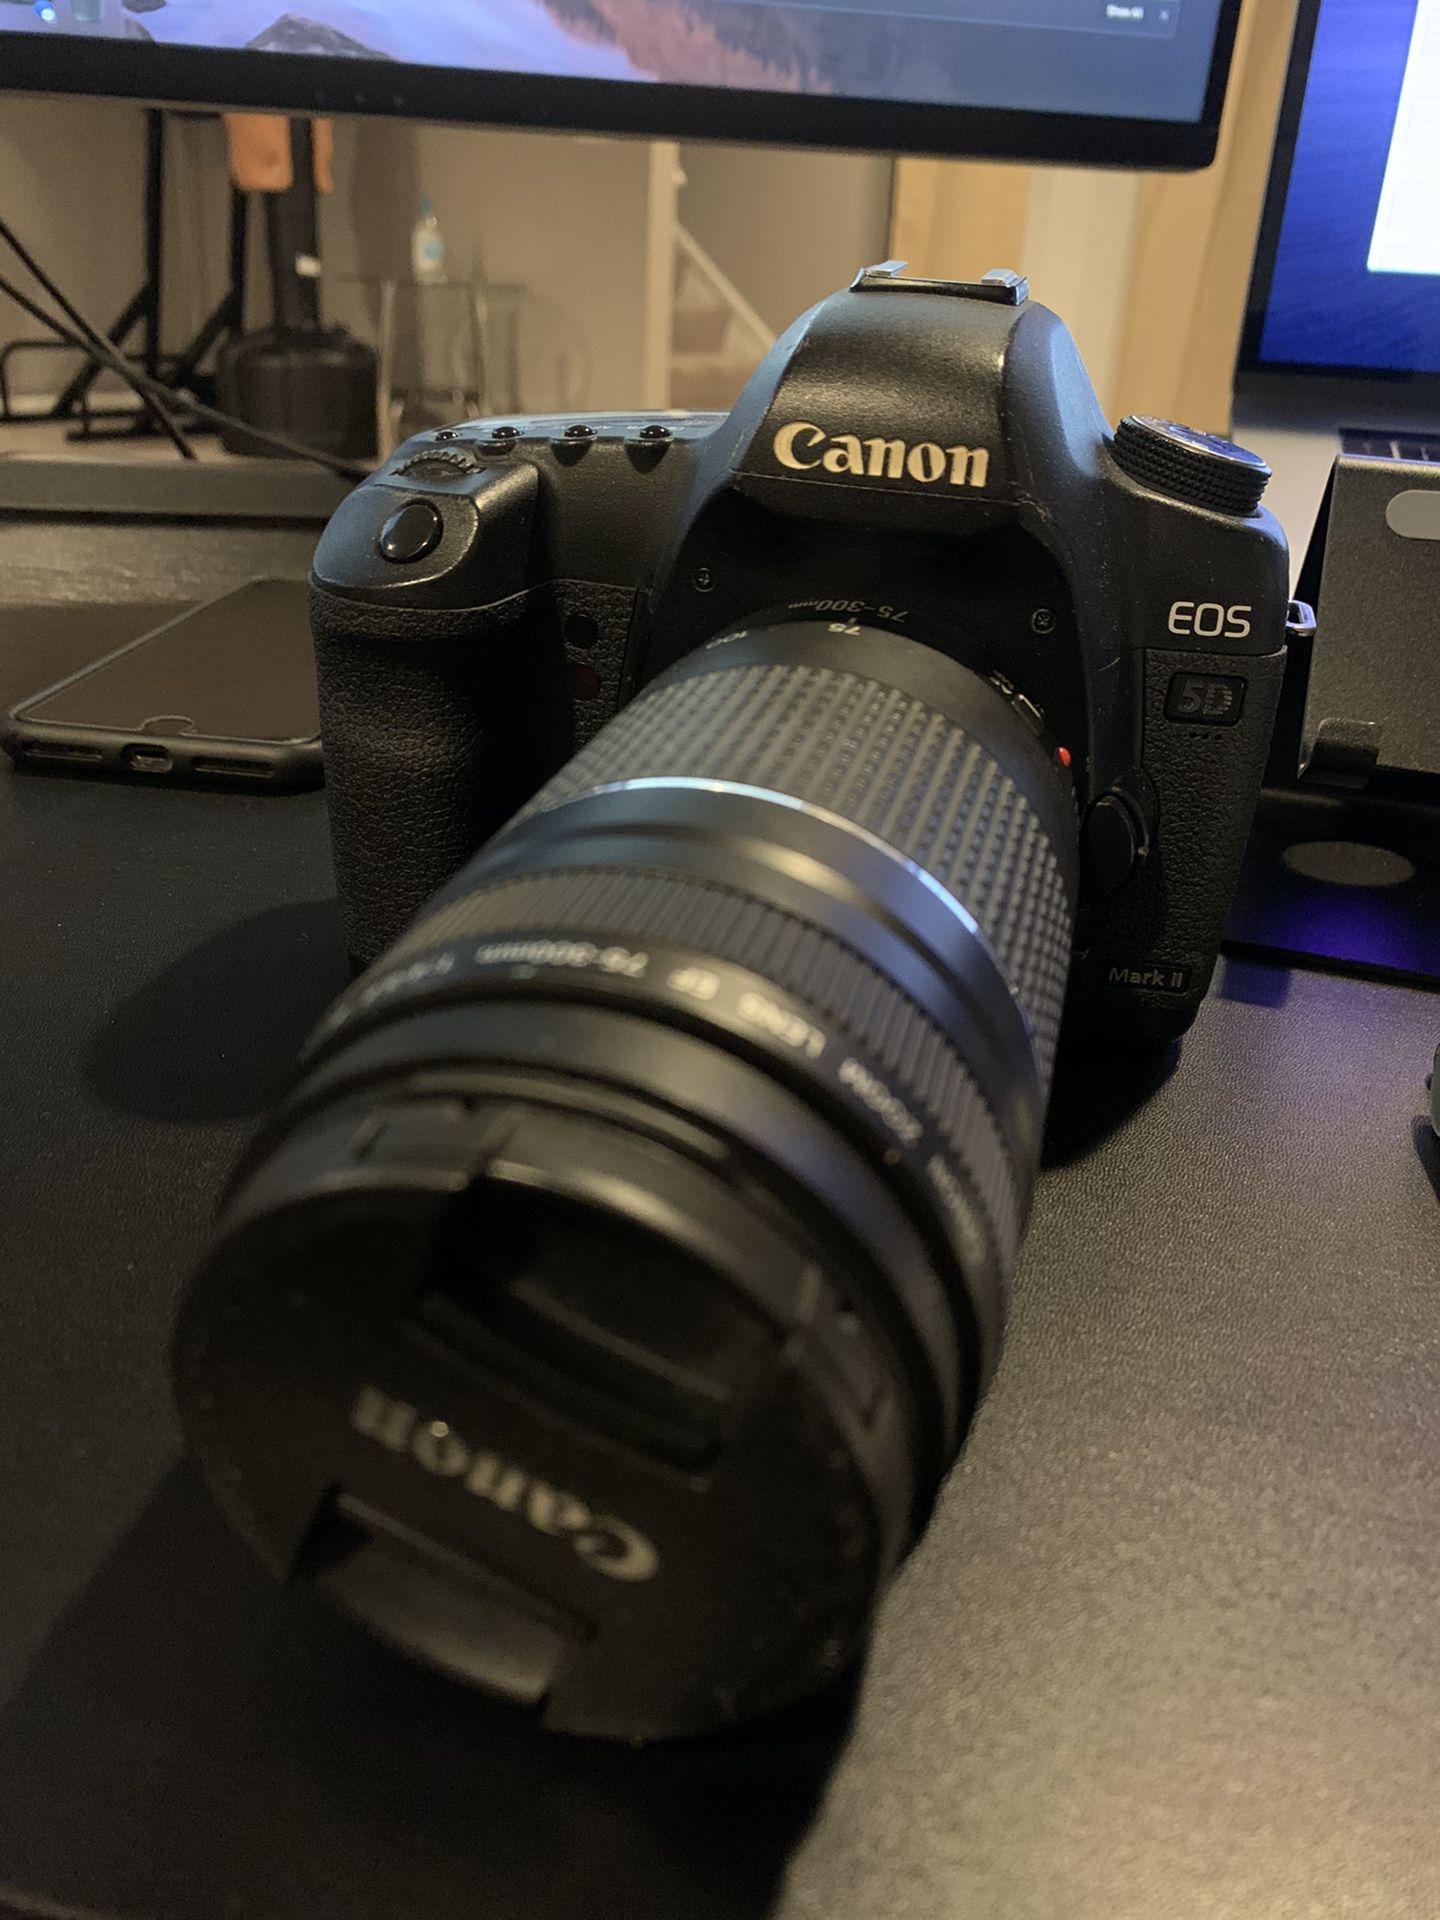 5D Mark iI for sale with 75-300 Zoom lens